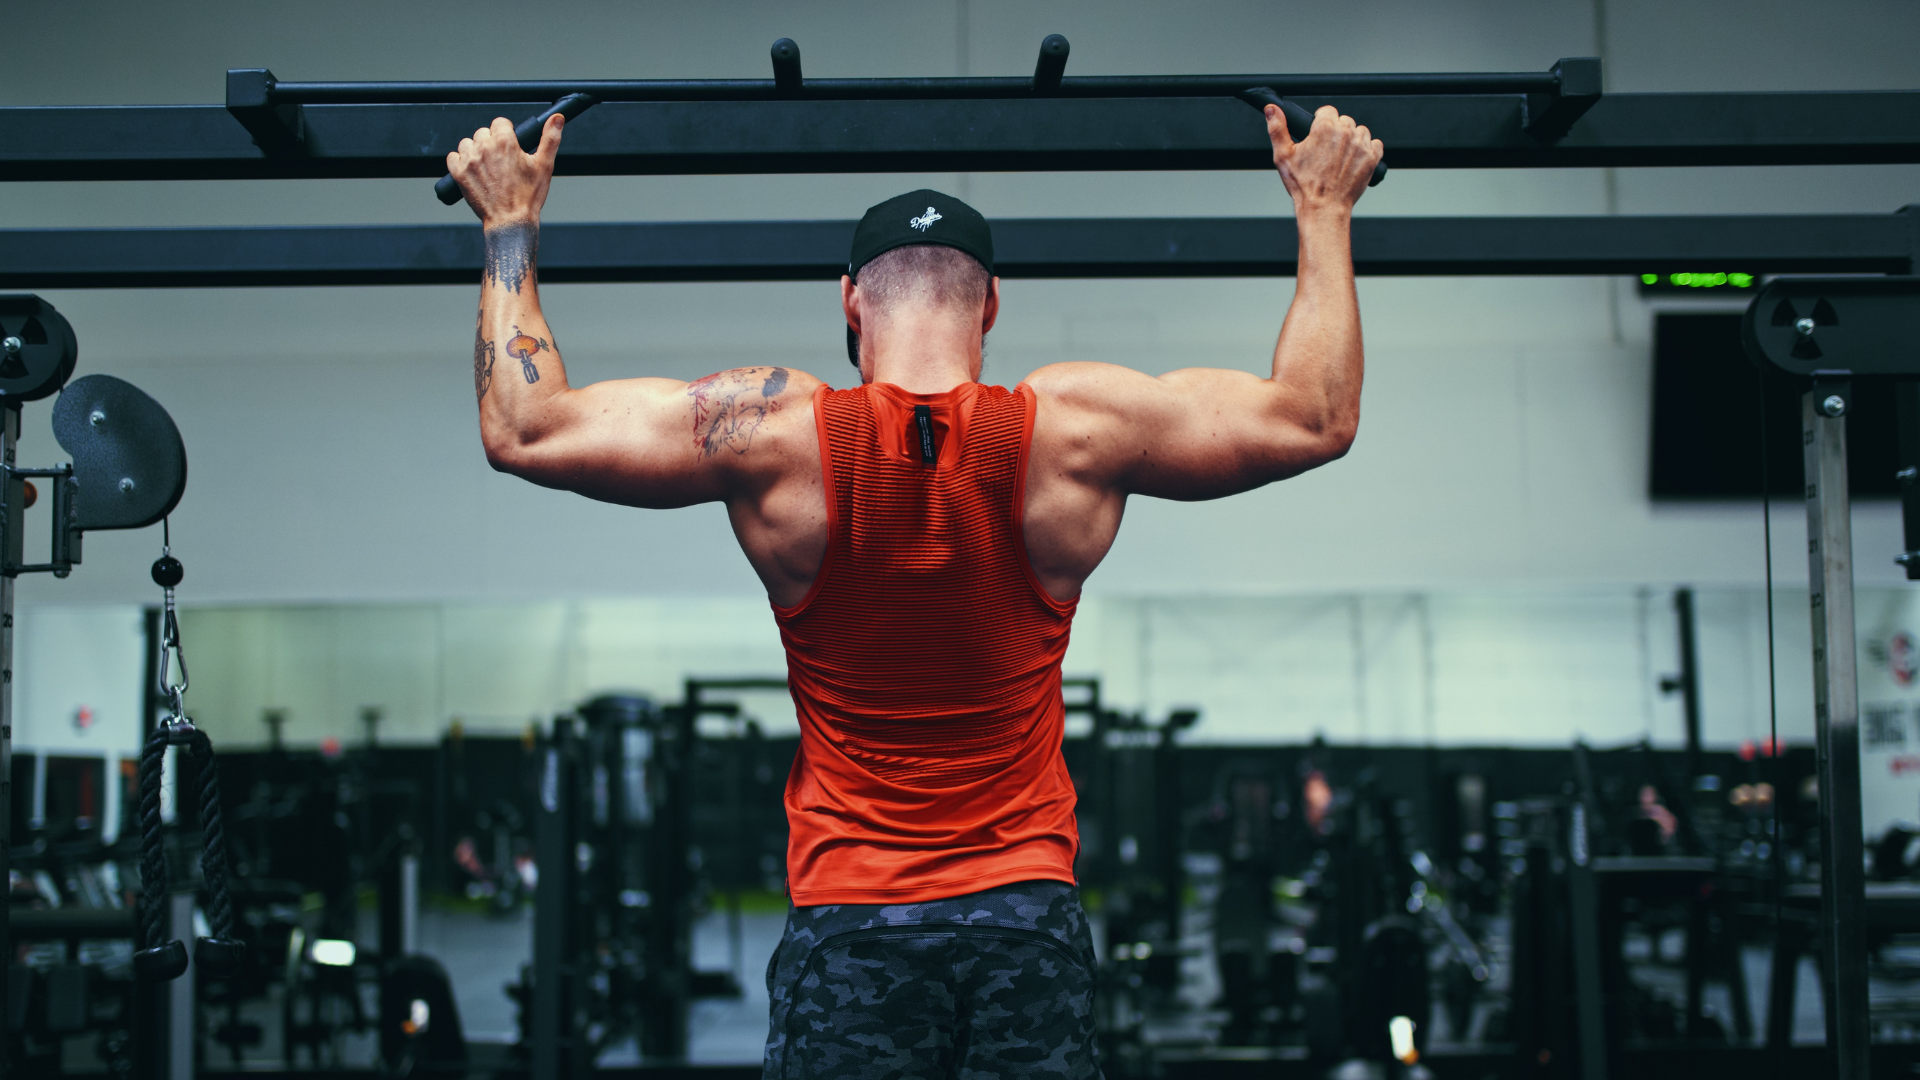 Muscle Toning Workouts: How To Get Ripped!